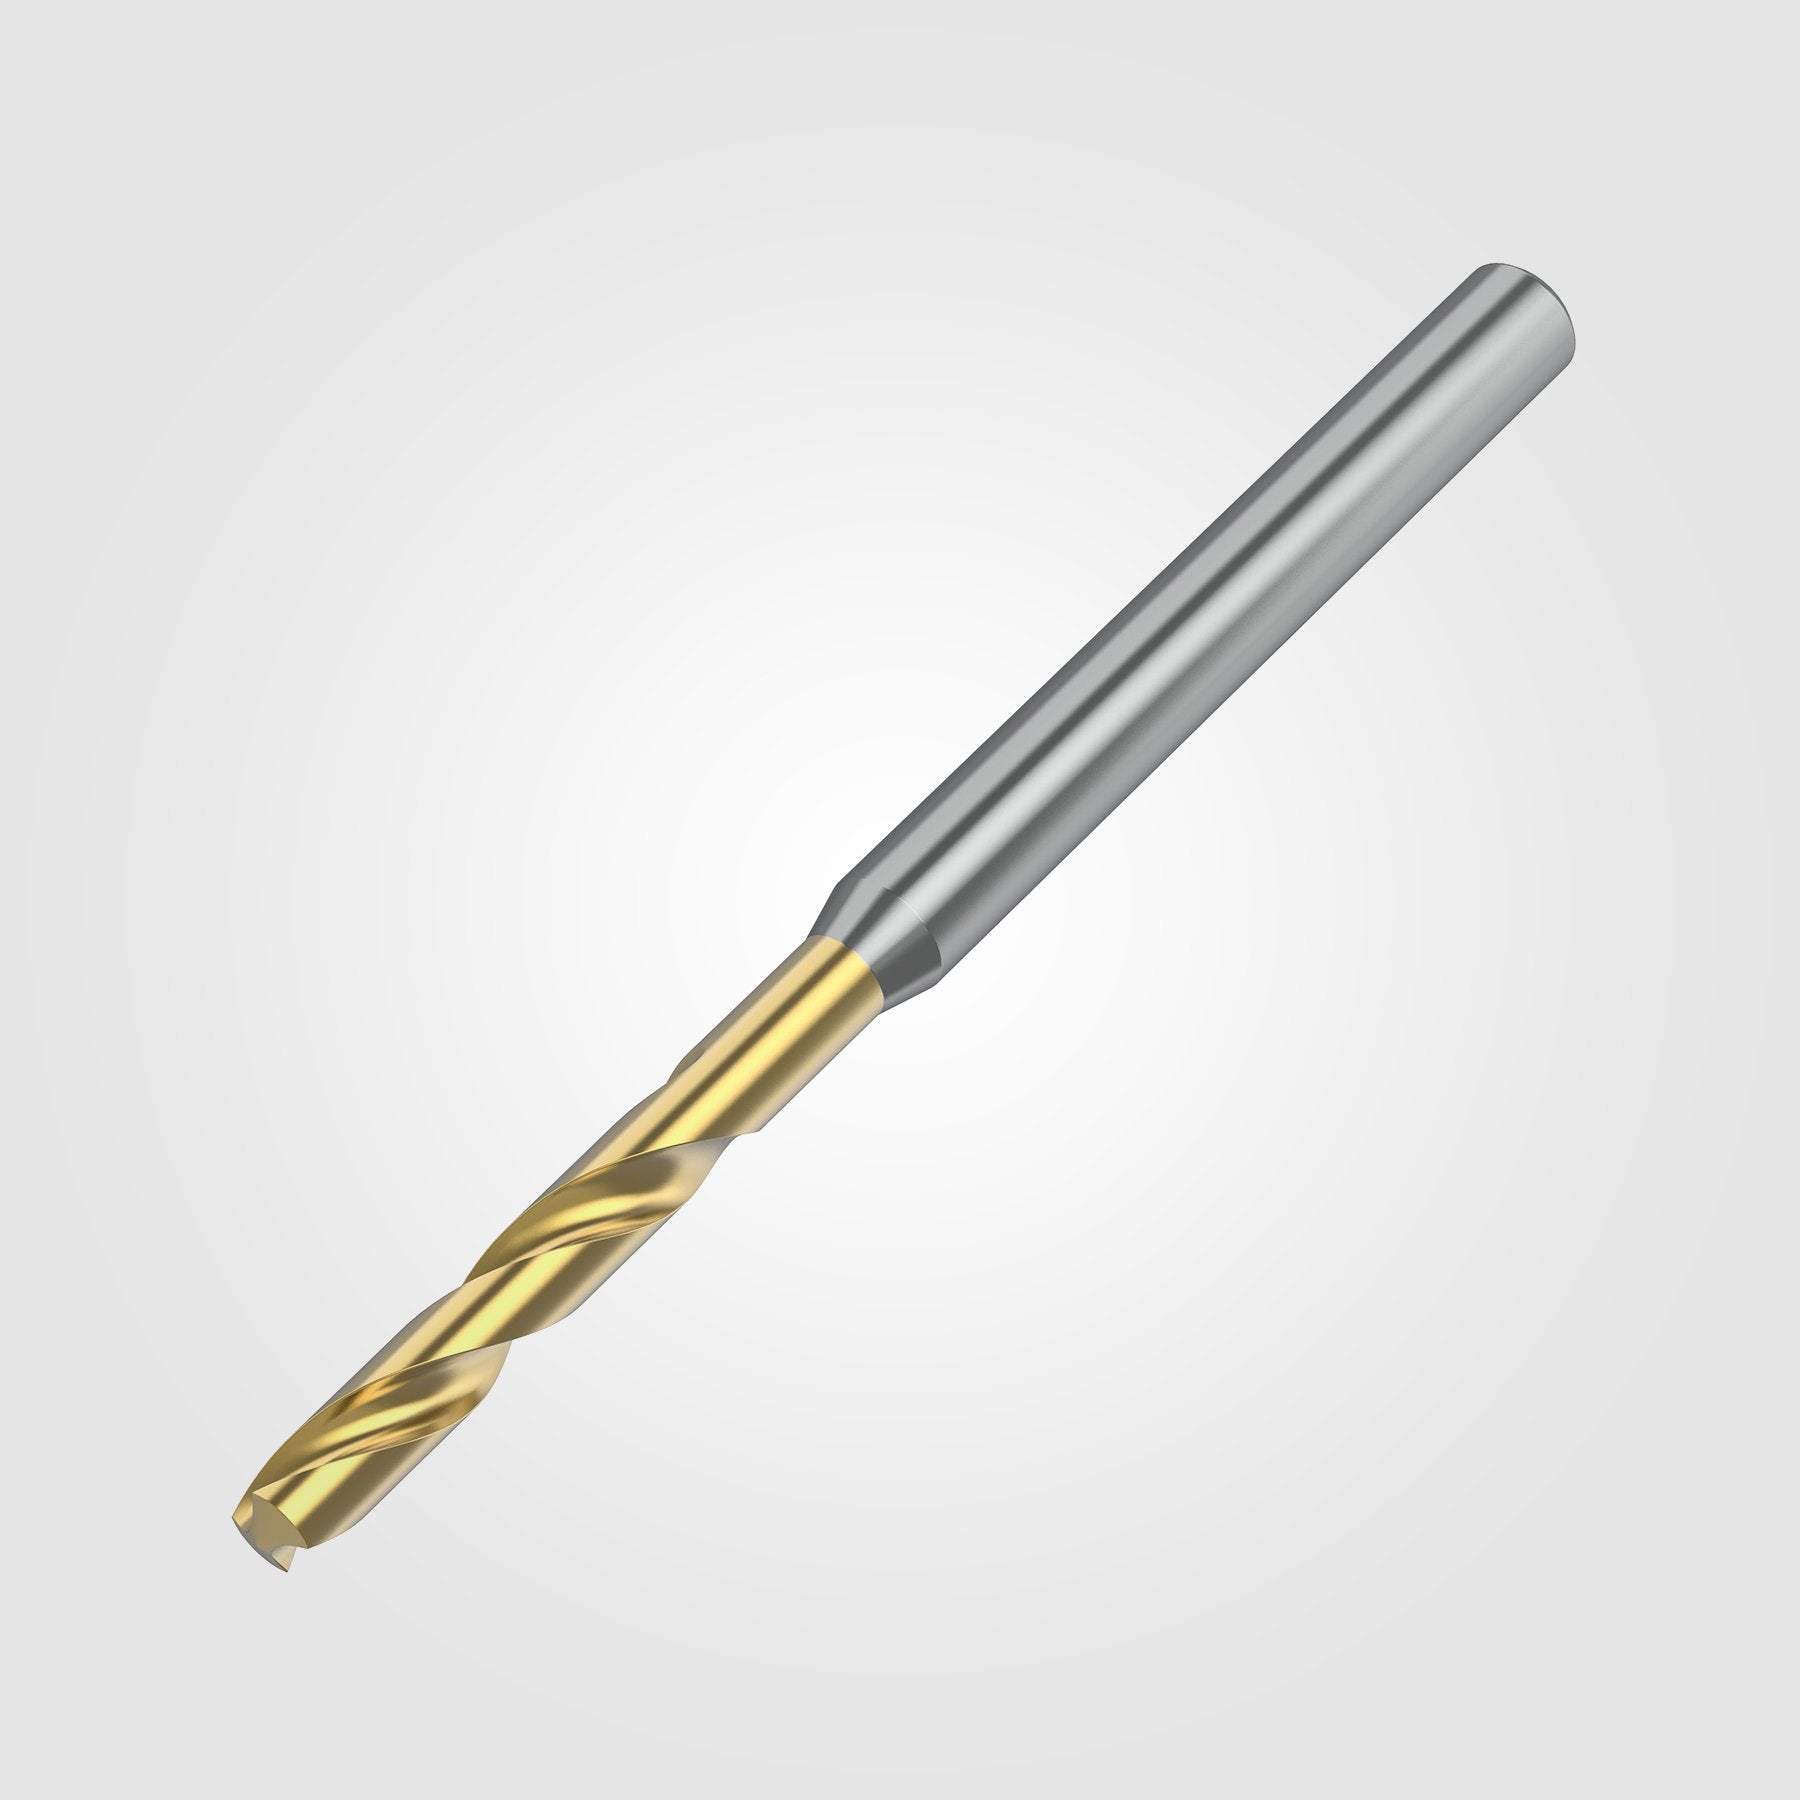 GOdrill (THROUGH COOLANT) | 2.9mm / .1142" / 3xD | SOLID CARBIDE DRILL | 4148857